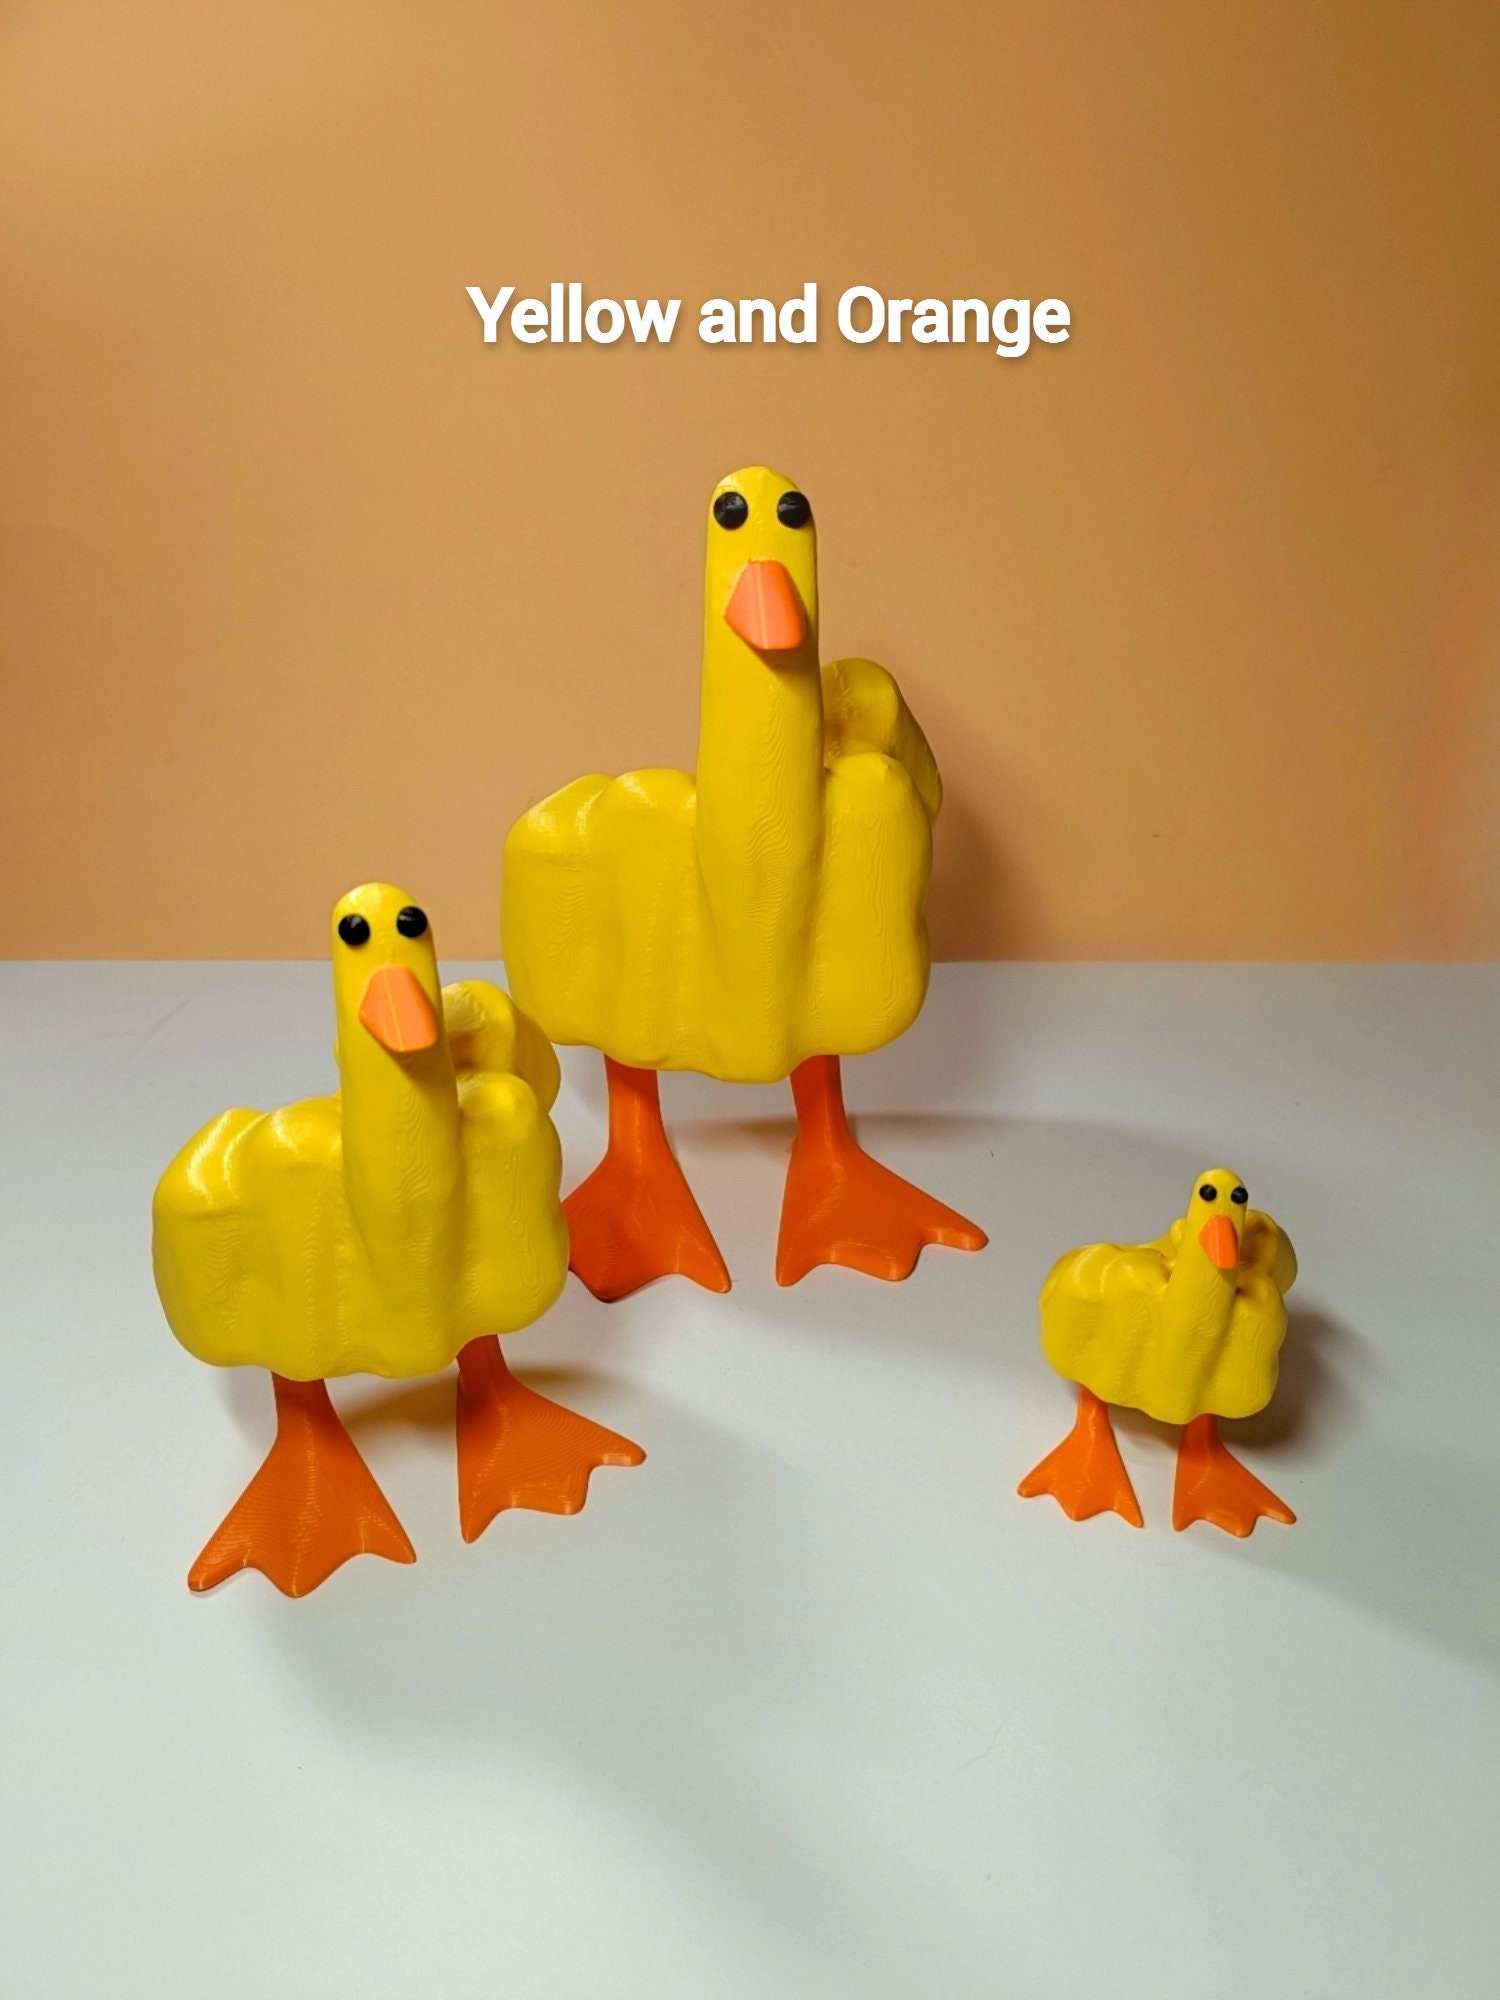 The Duck-you: Original 3D Printed Figurine Middle Finger Statue